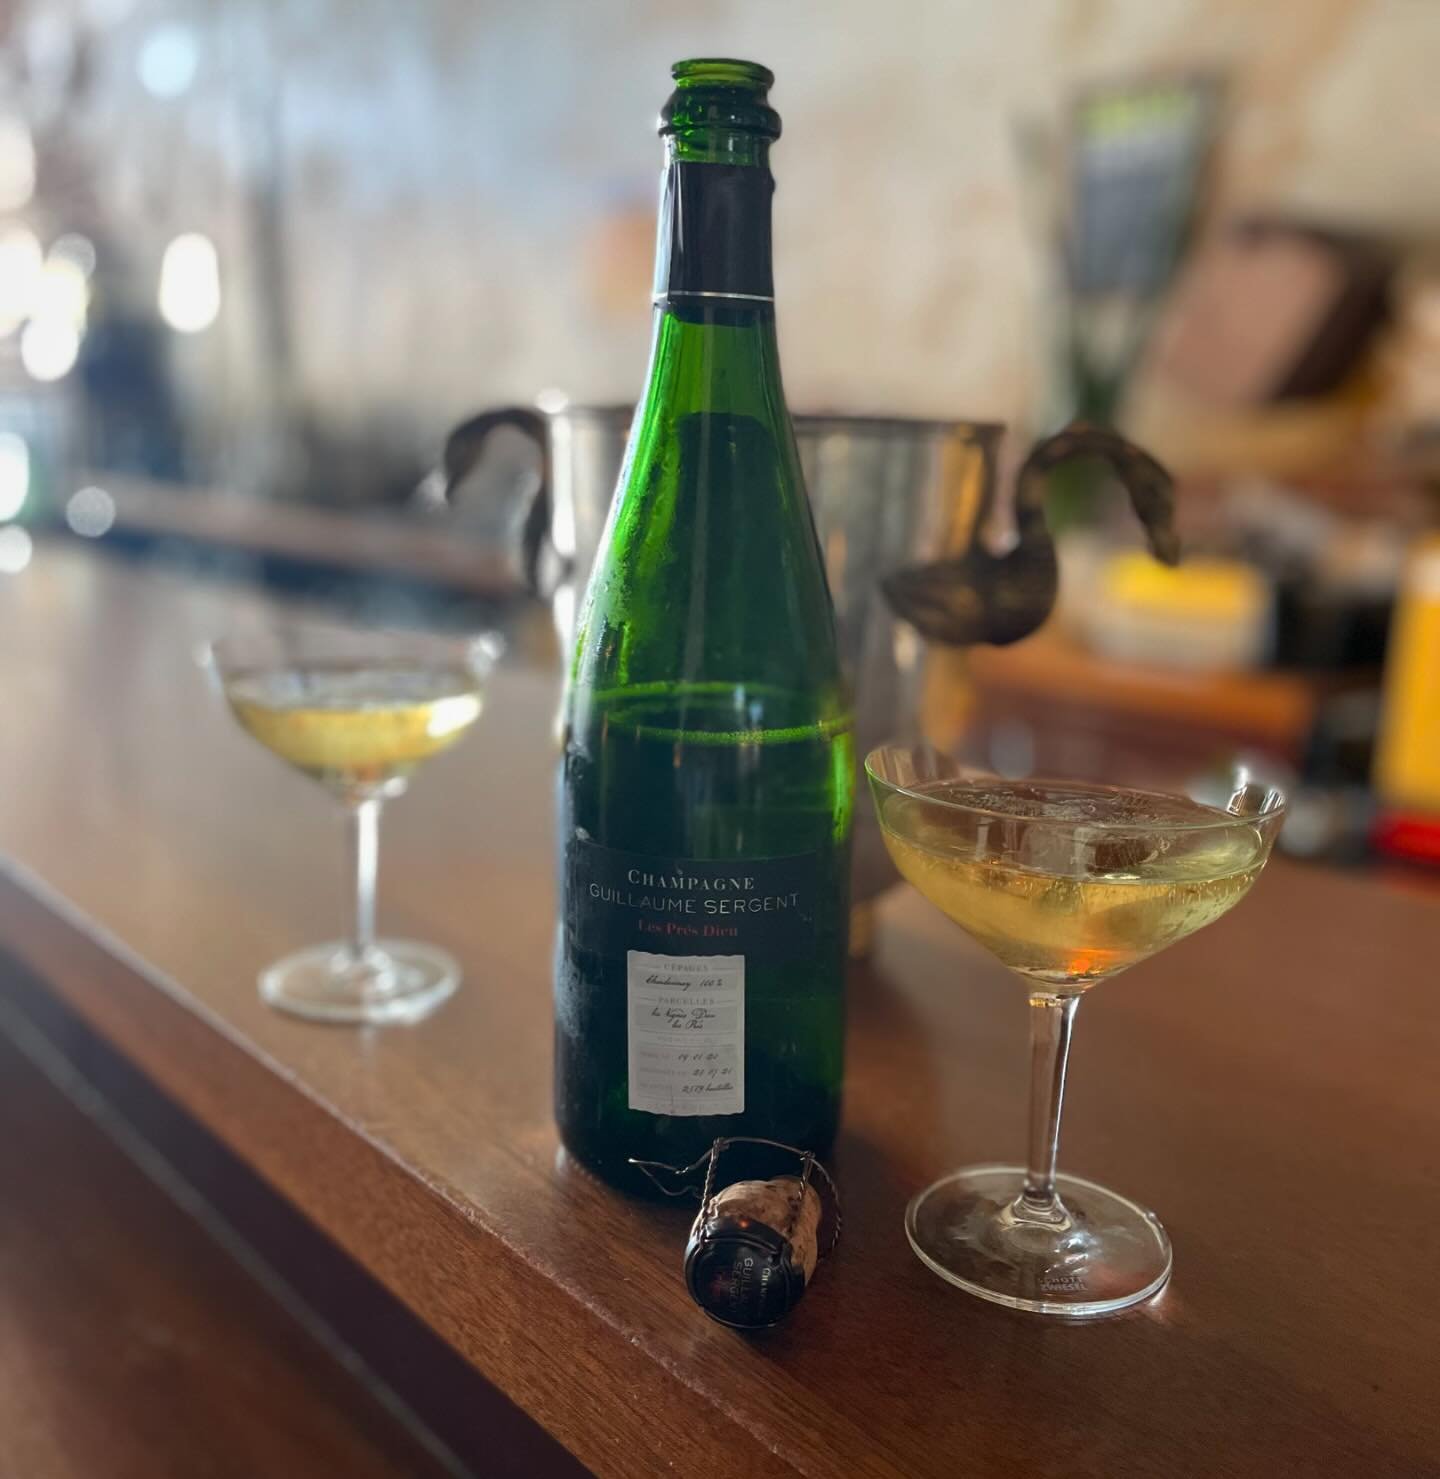 CONFIRMED: Champagne is delicious :) sip from our amazing list of Grower Producer Champagnes, a perfect Sunday treat! open at 2pm 🍾🥂 #tabularasabar #growerchampagne